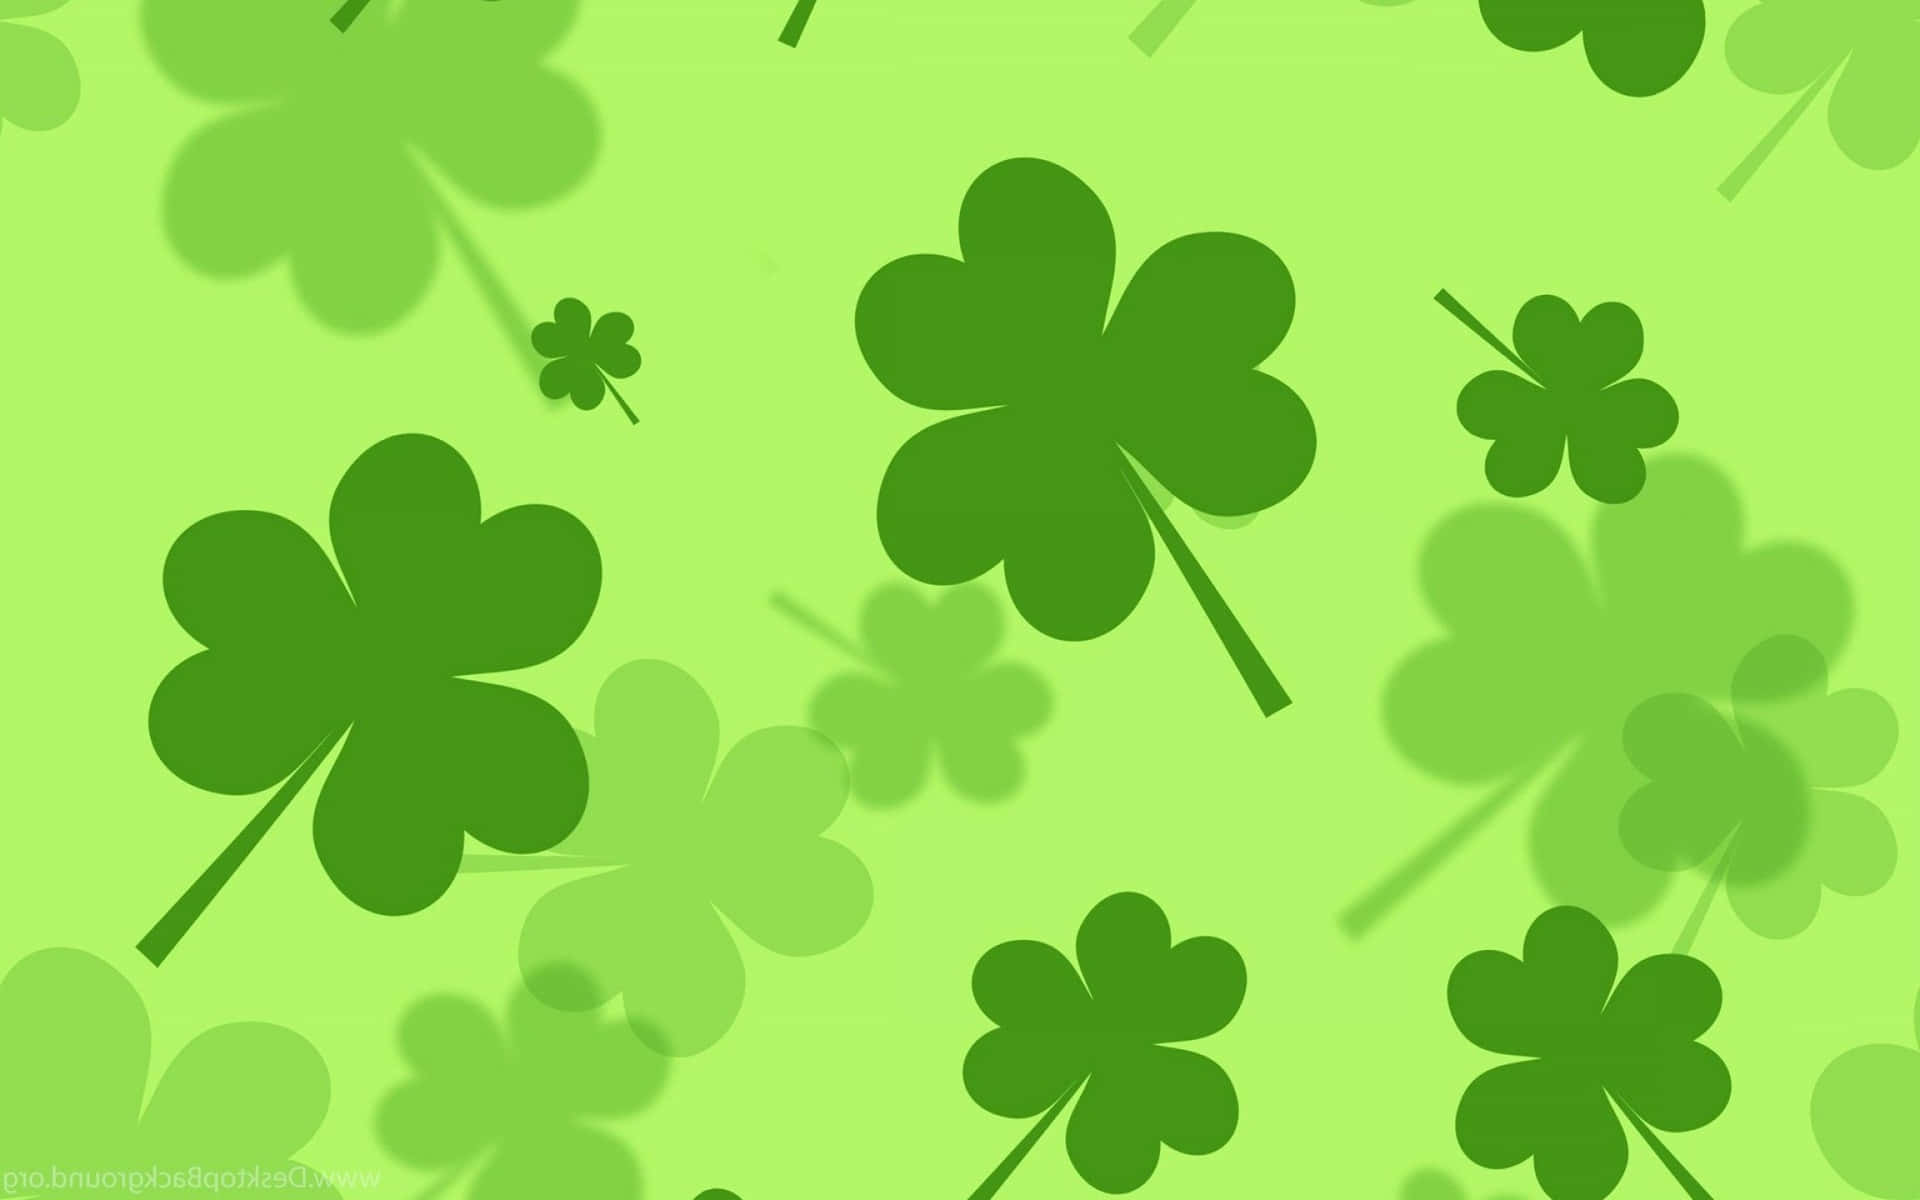 Celebrate St Patrick's Day with this luck-bringing Shamrock Wallpaper